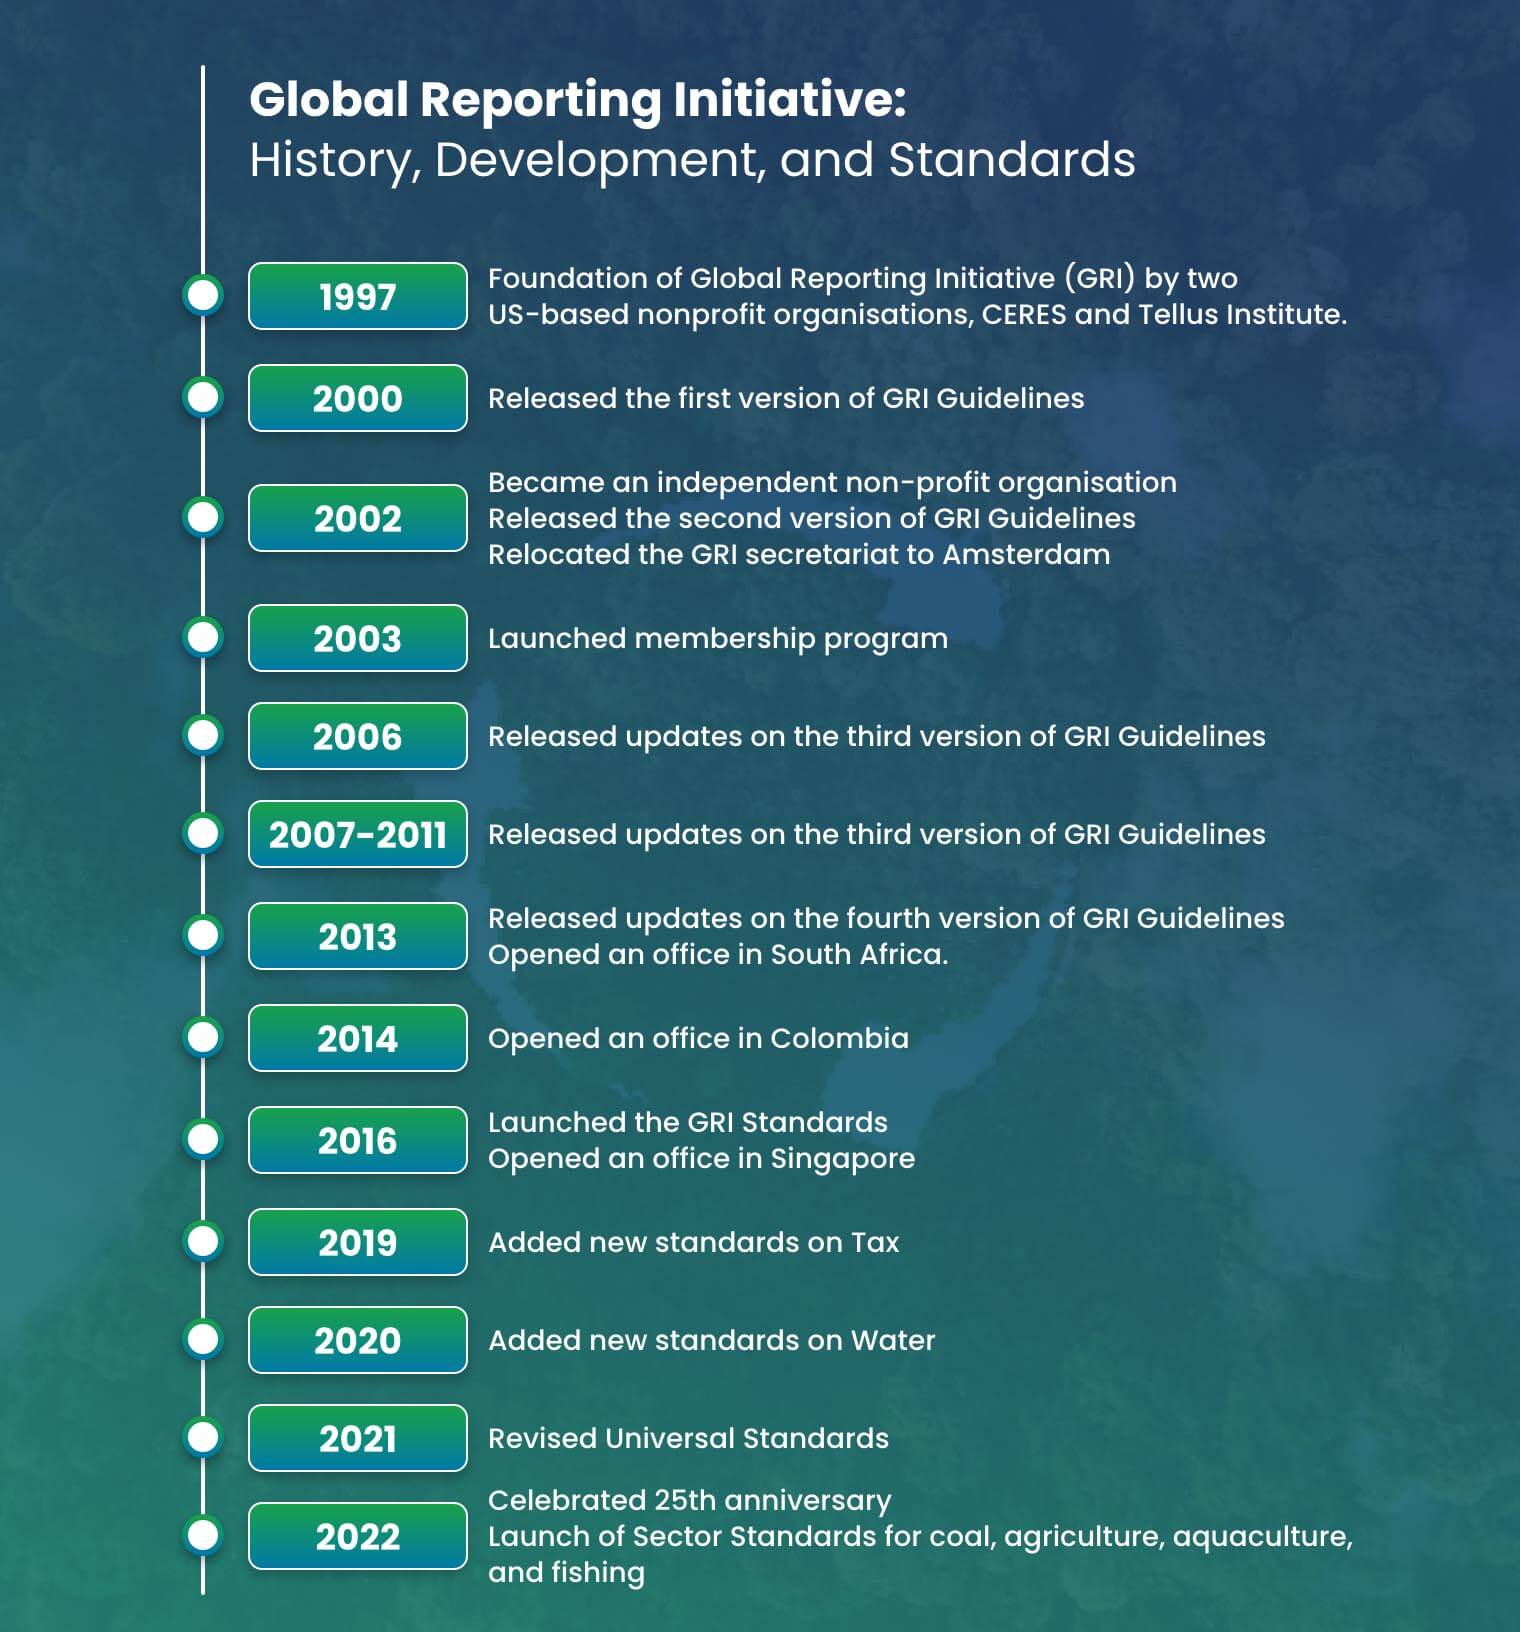 History, Development, and Standards of GRI chart